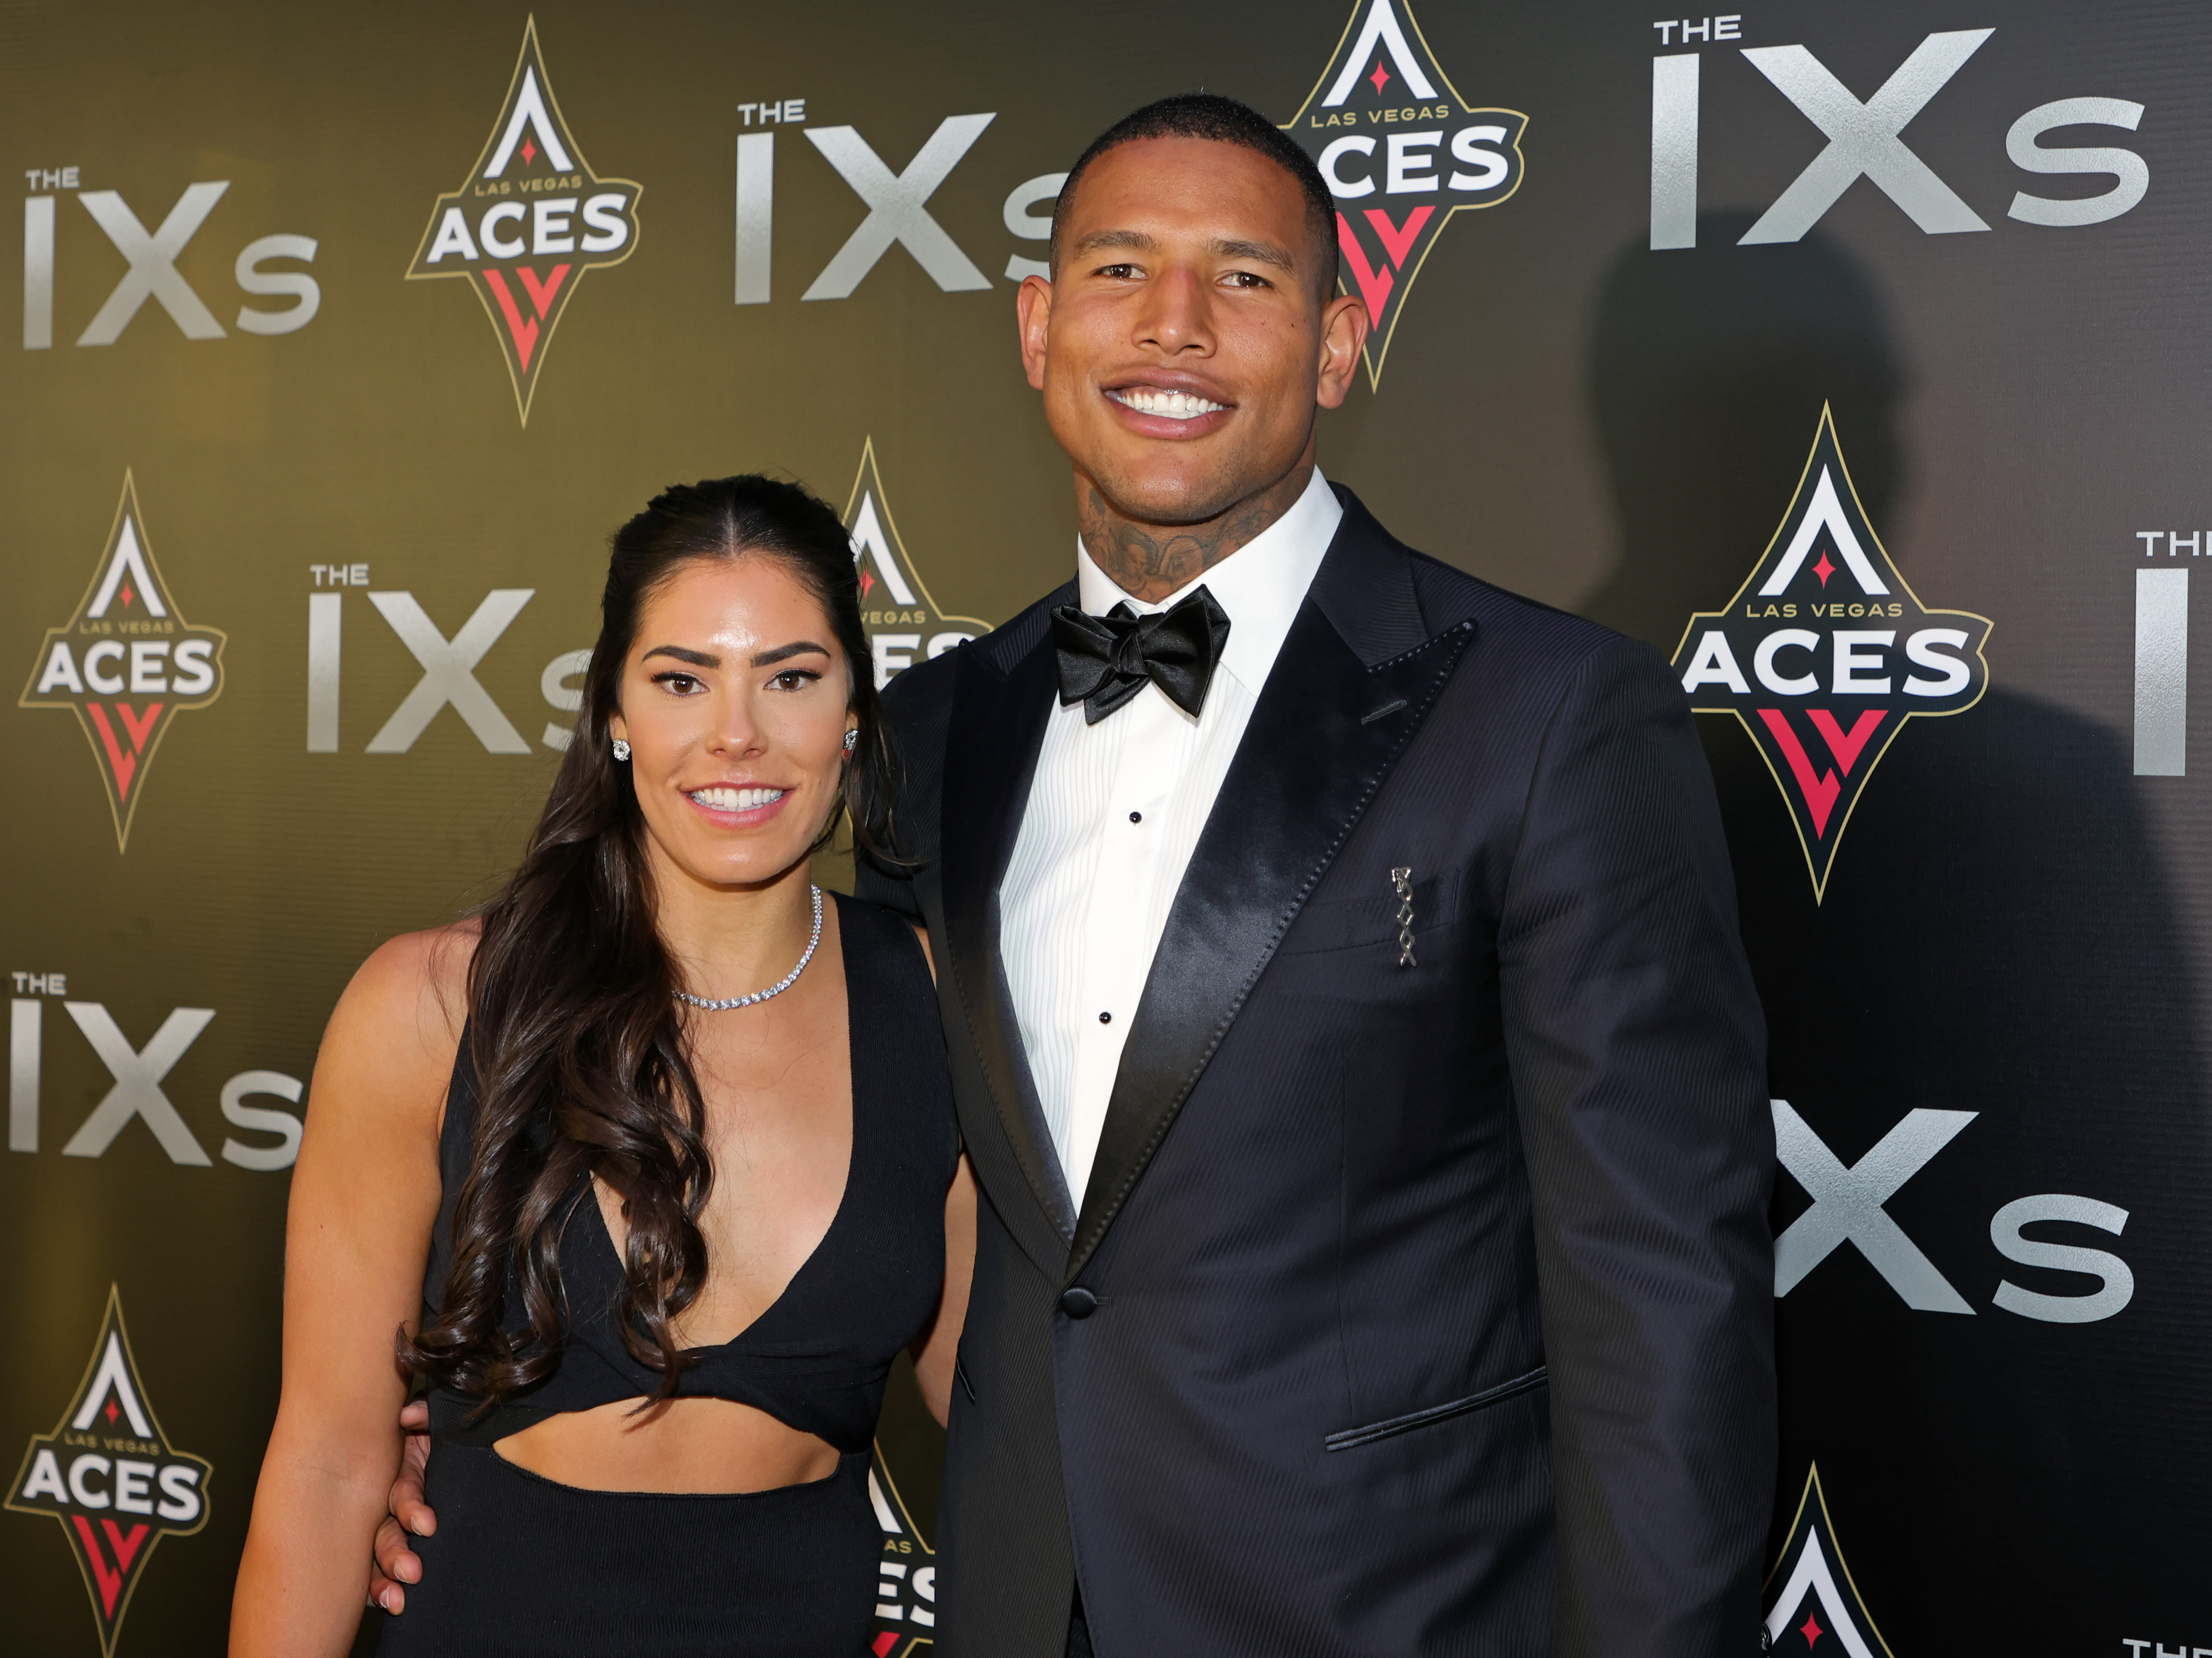 Aces star Kelsey Plum, Giants TE Darren Waller file for divorce after 1 year of marriage